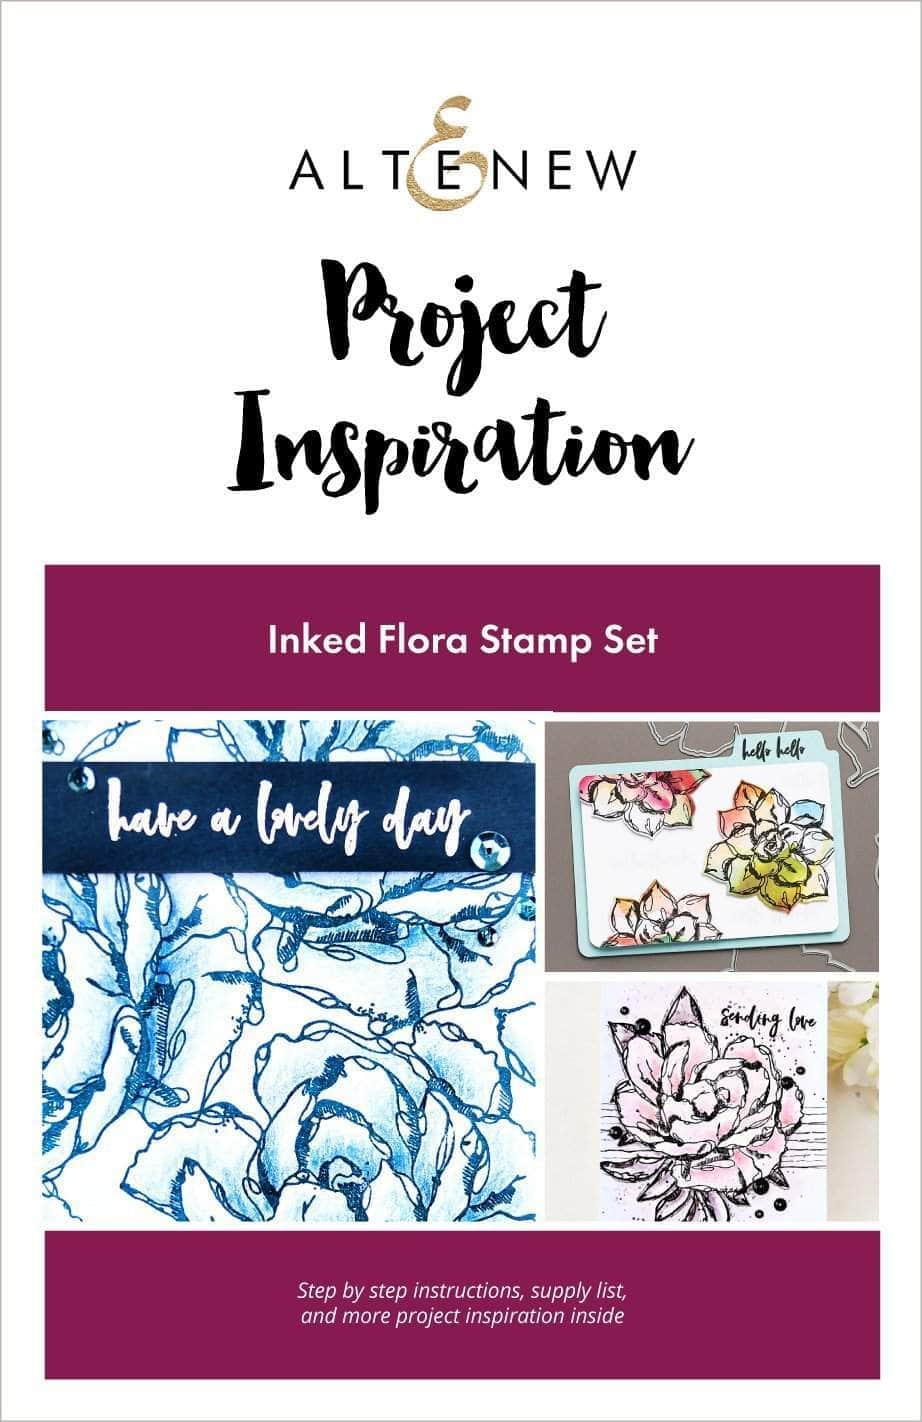 55Printing.com Printed Media Inked Flora Project Inspiration Guide